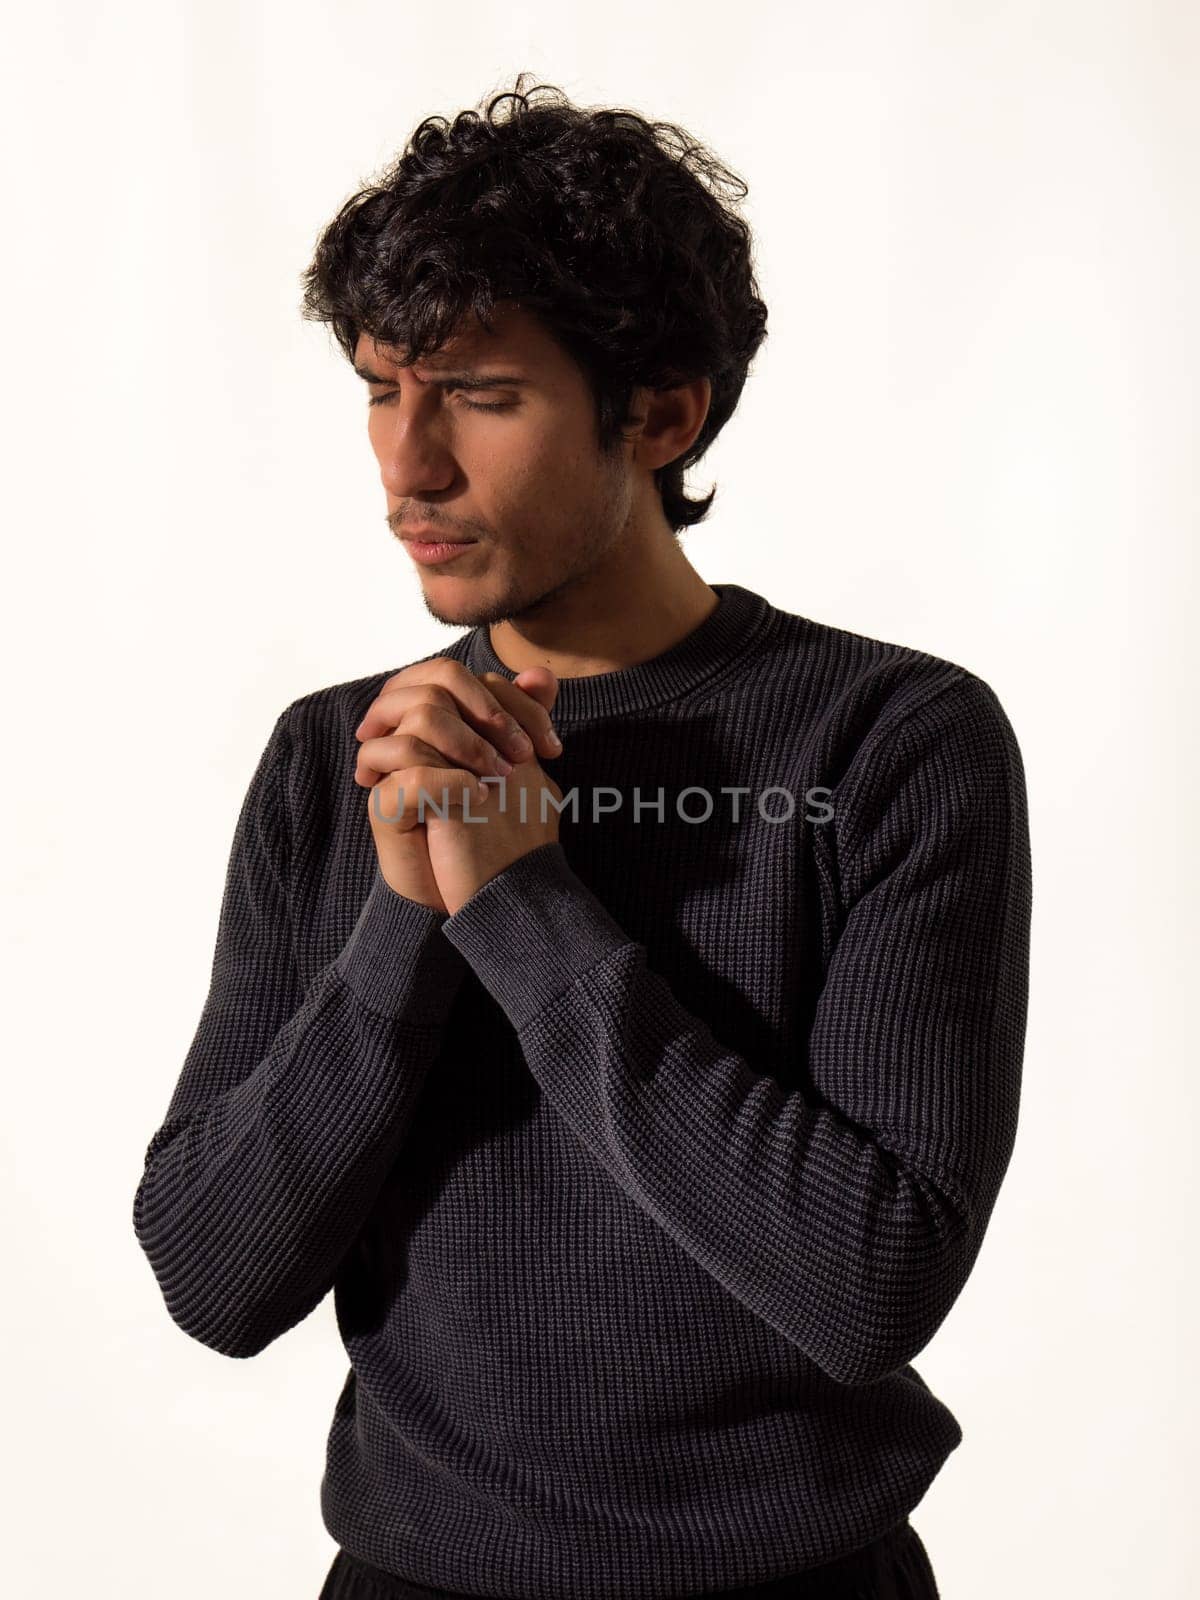 A Man in a Black Sweater Praying by artofphoto